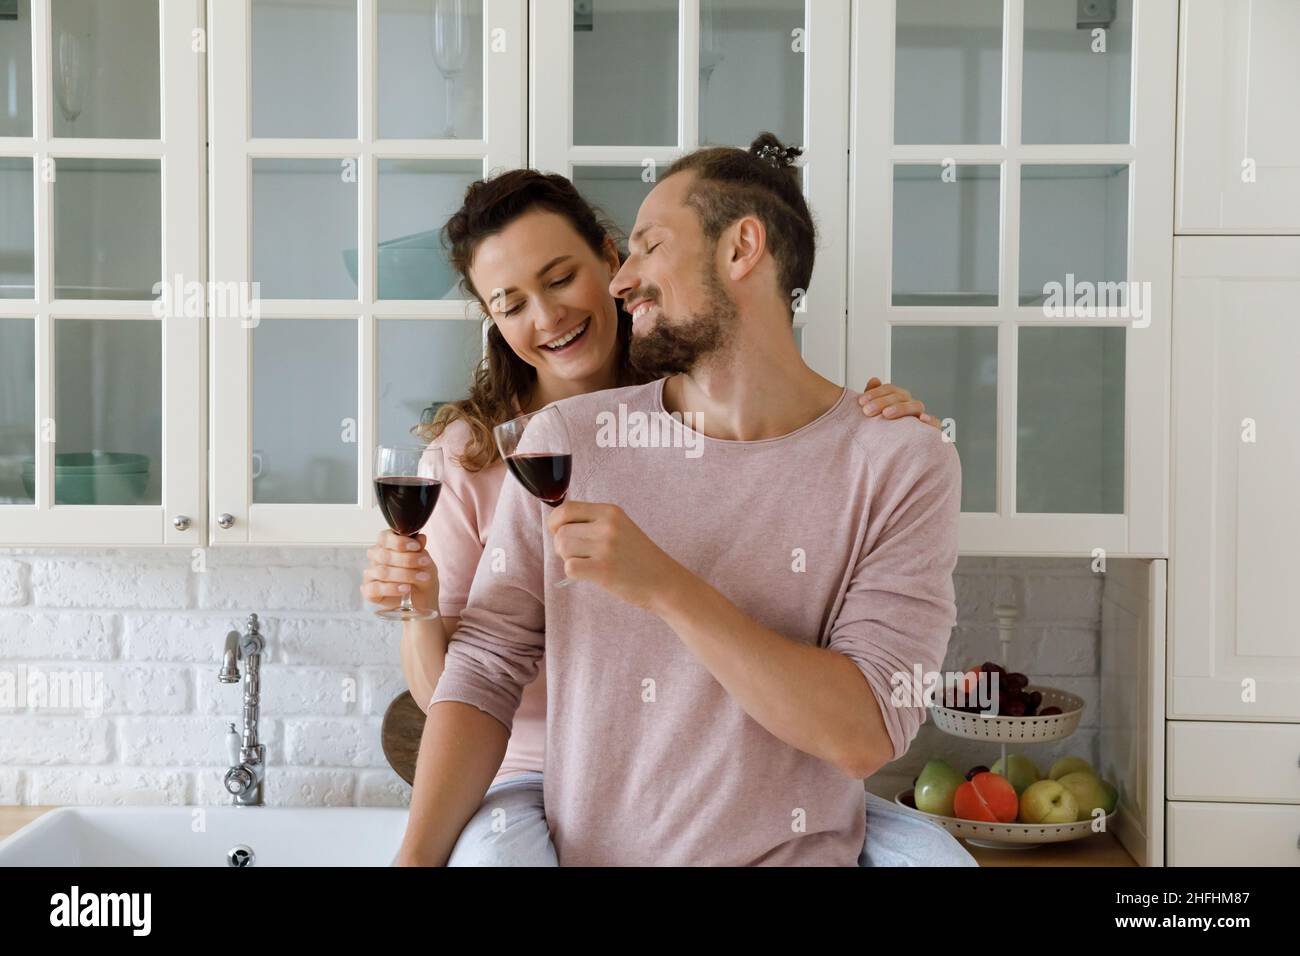 Happy family couple clinking glasses, dating at home. Stock Photo